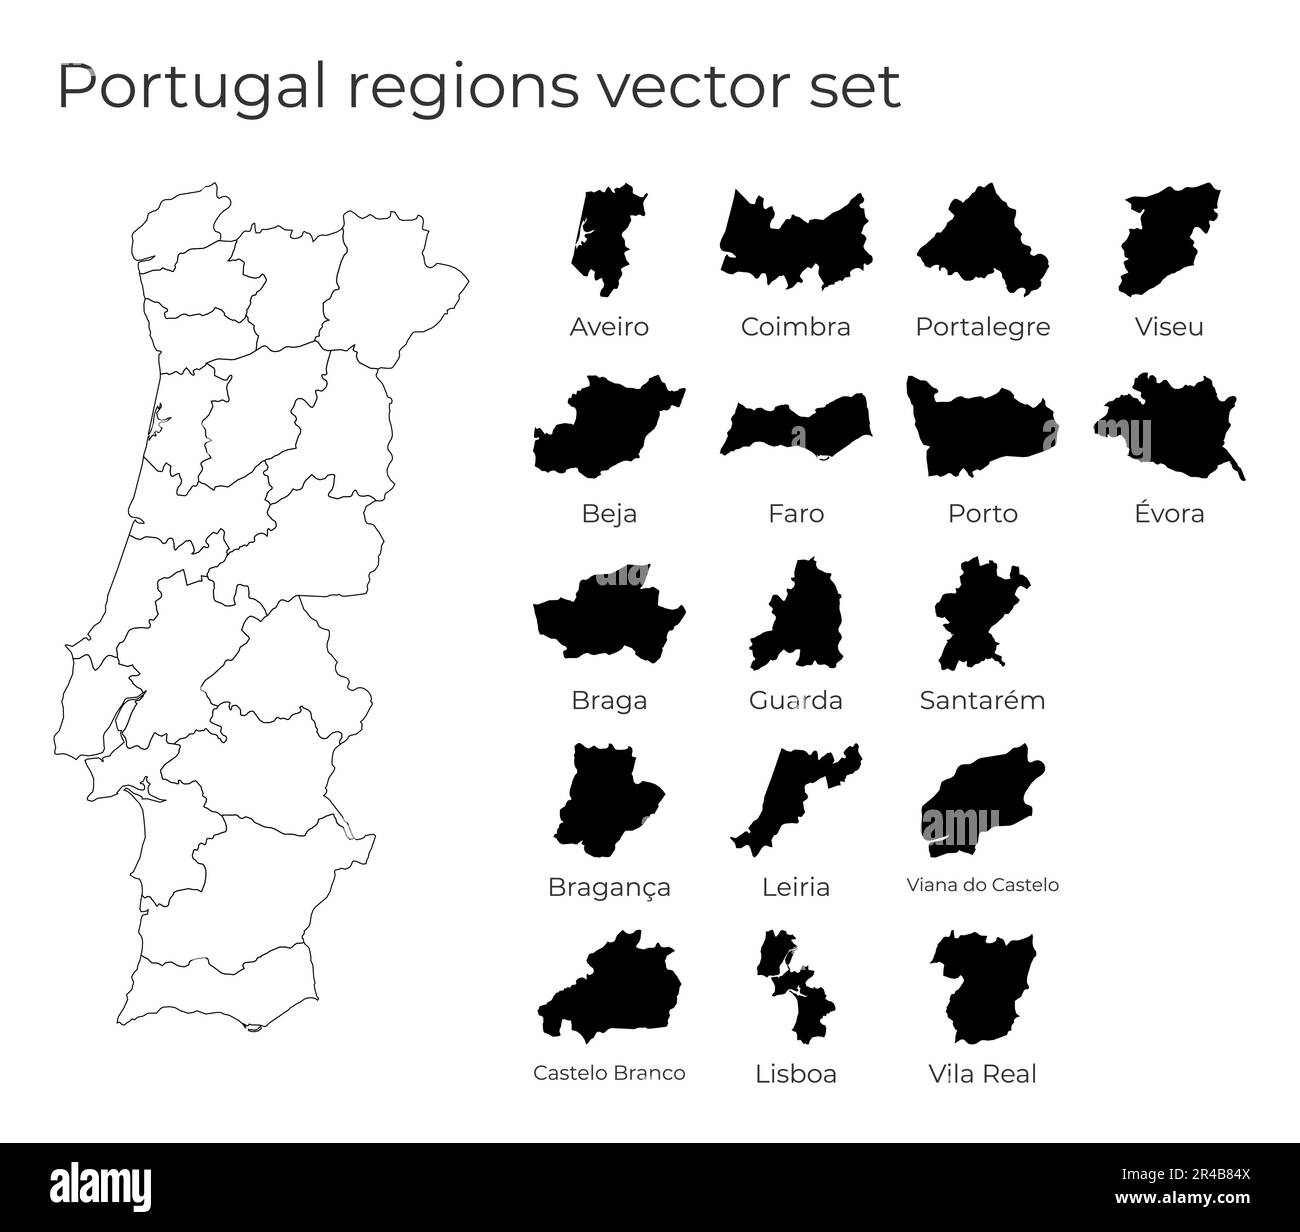 Portugal Map Vector Hd Images, Portugal Map In Black, Clip